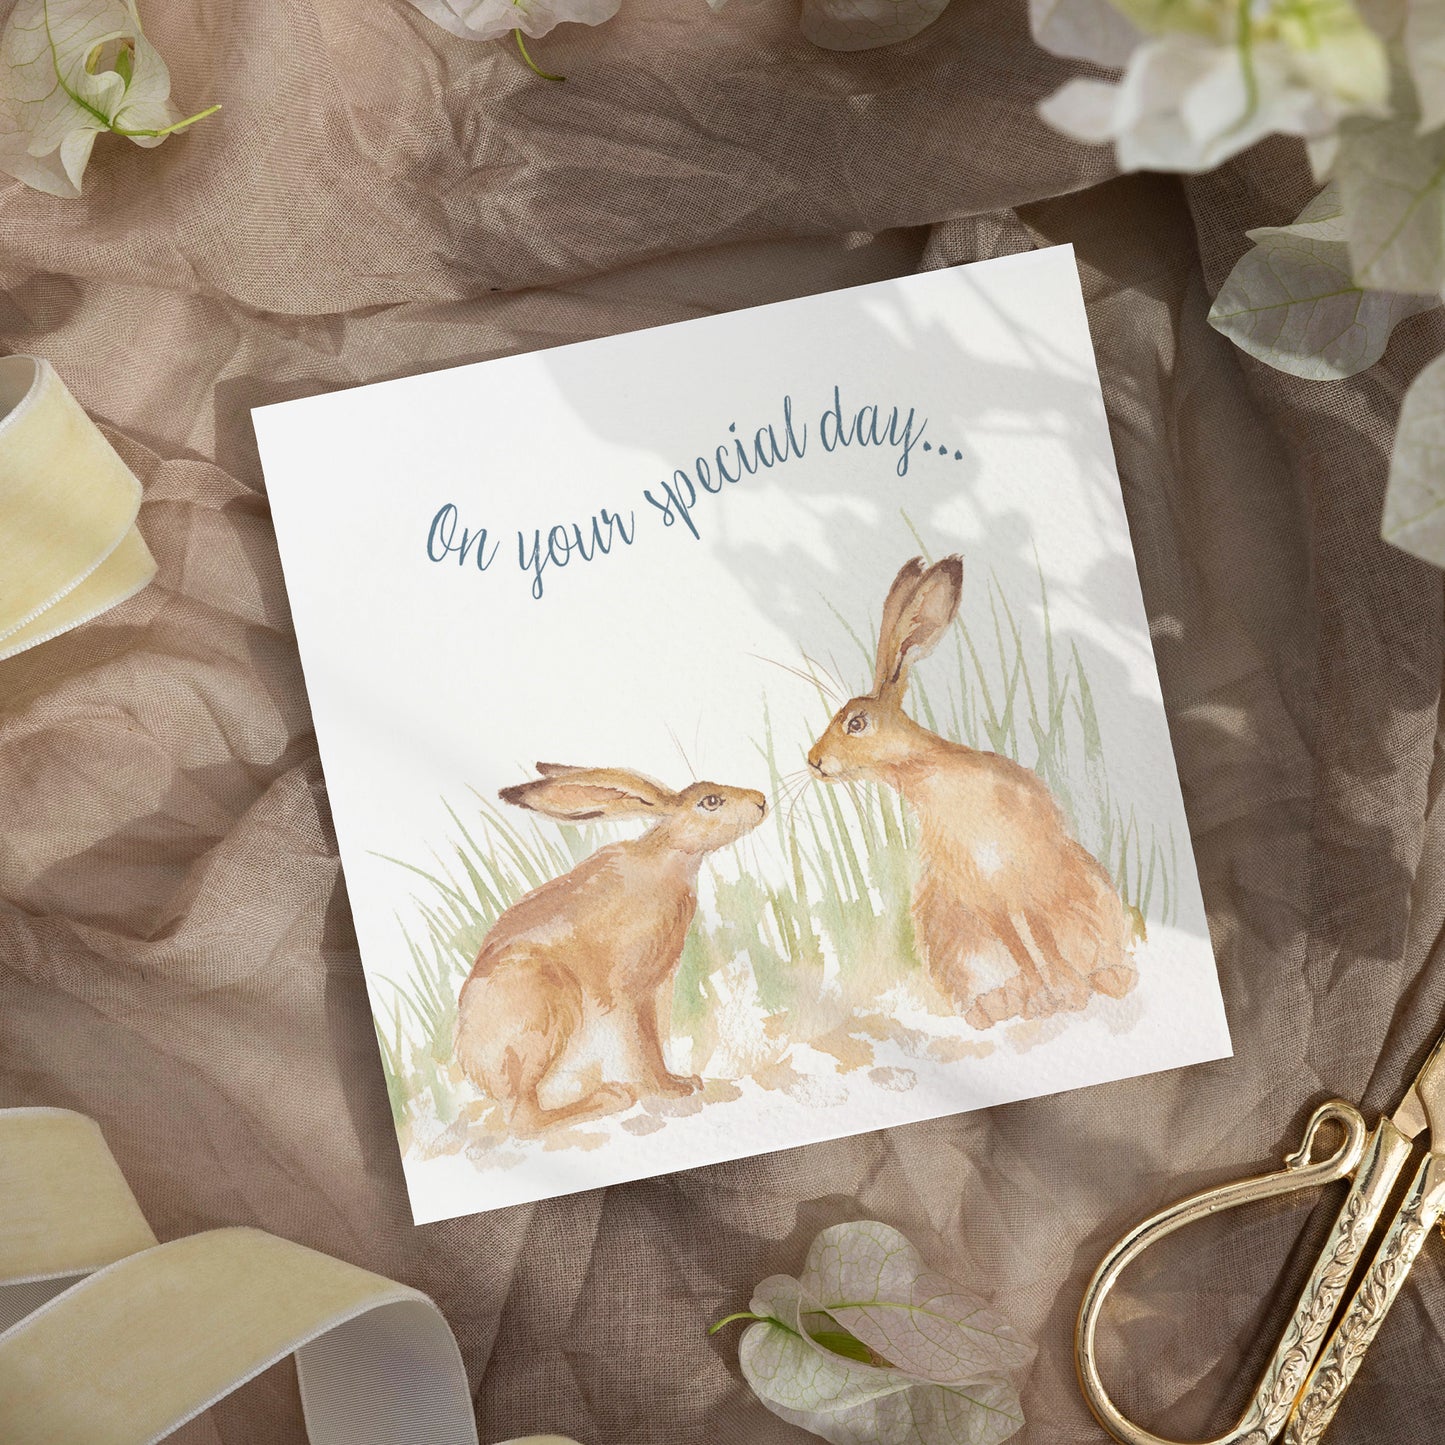 A greetings card laid flat on a table surrounded by gift wrapping items including scissors and ribbon. The card reads On Your Special Day in dark blue text above a hare couple in a watercolour style.